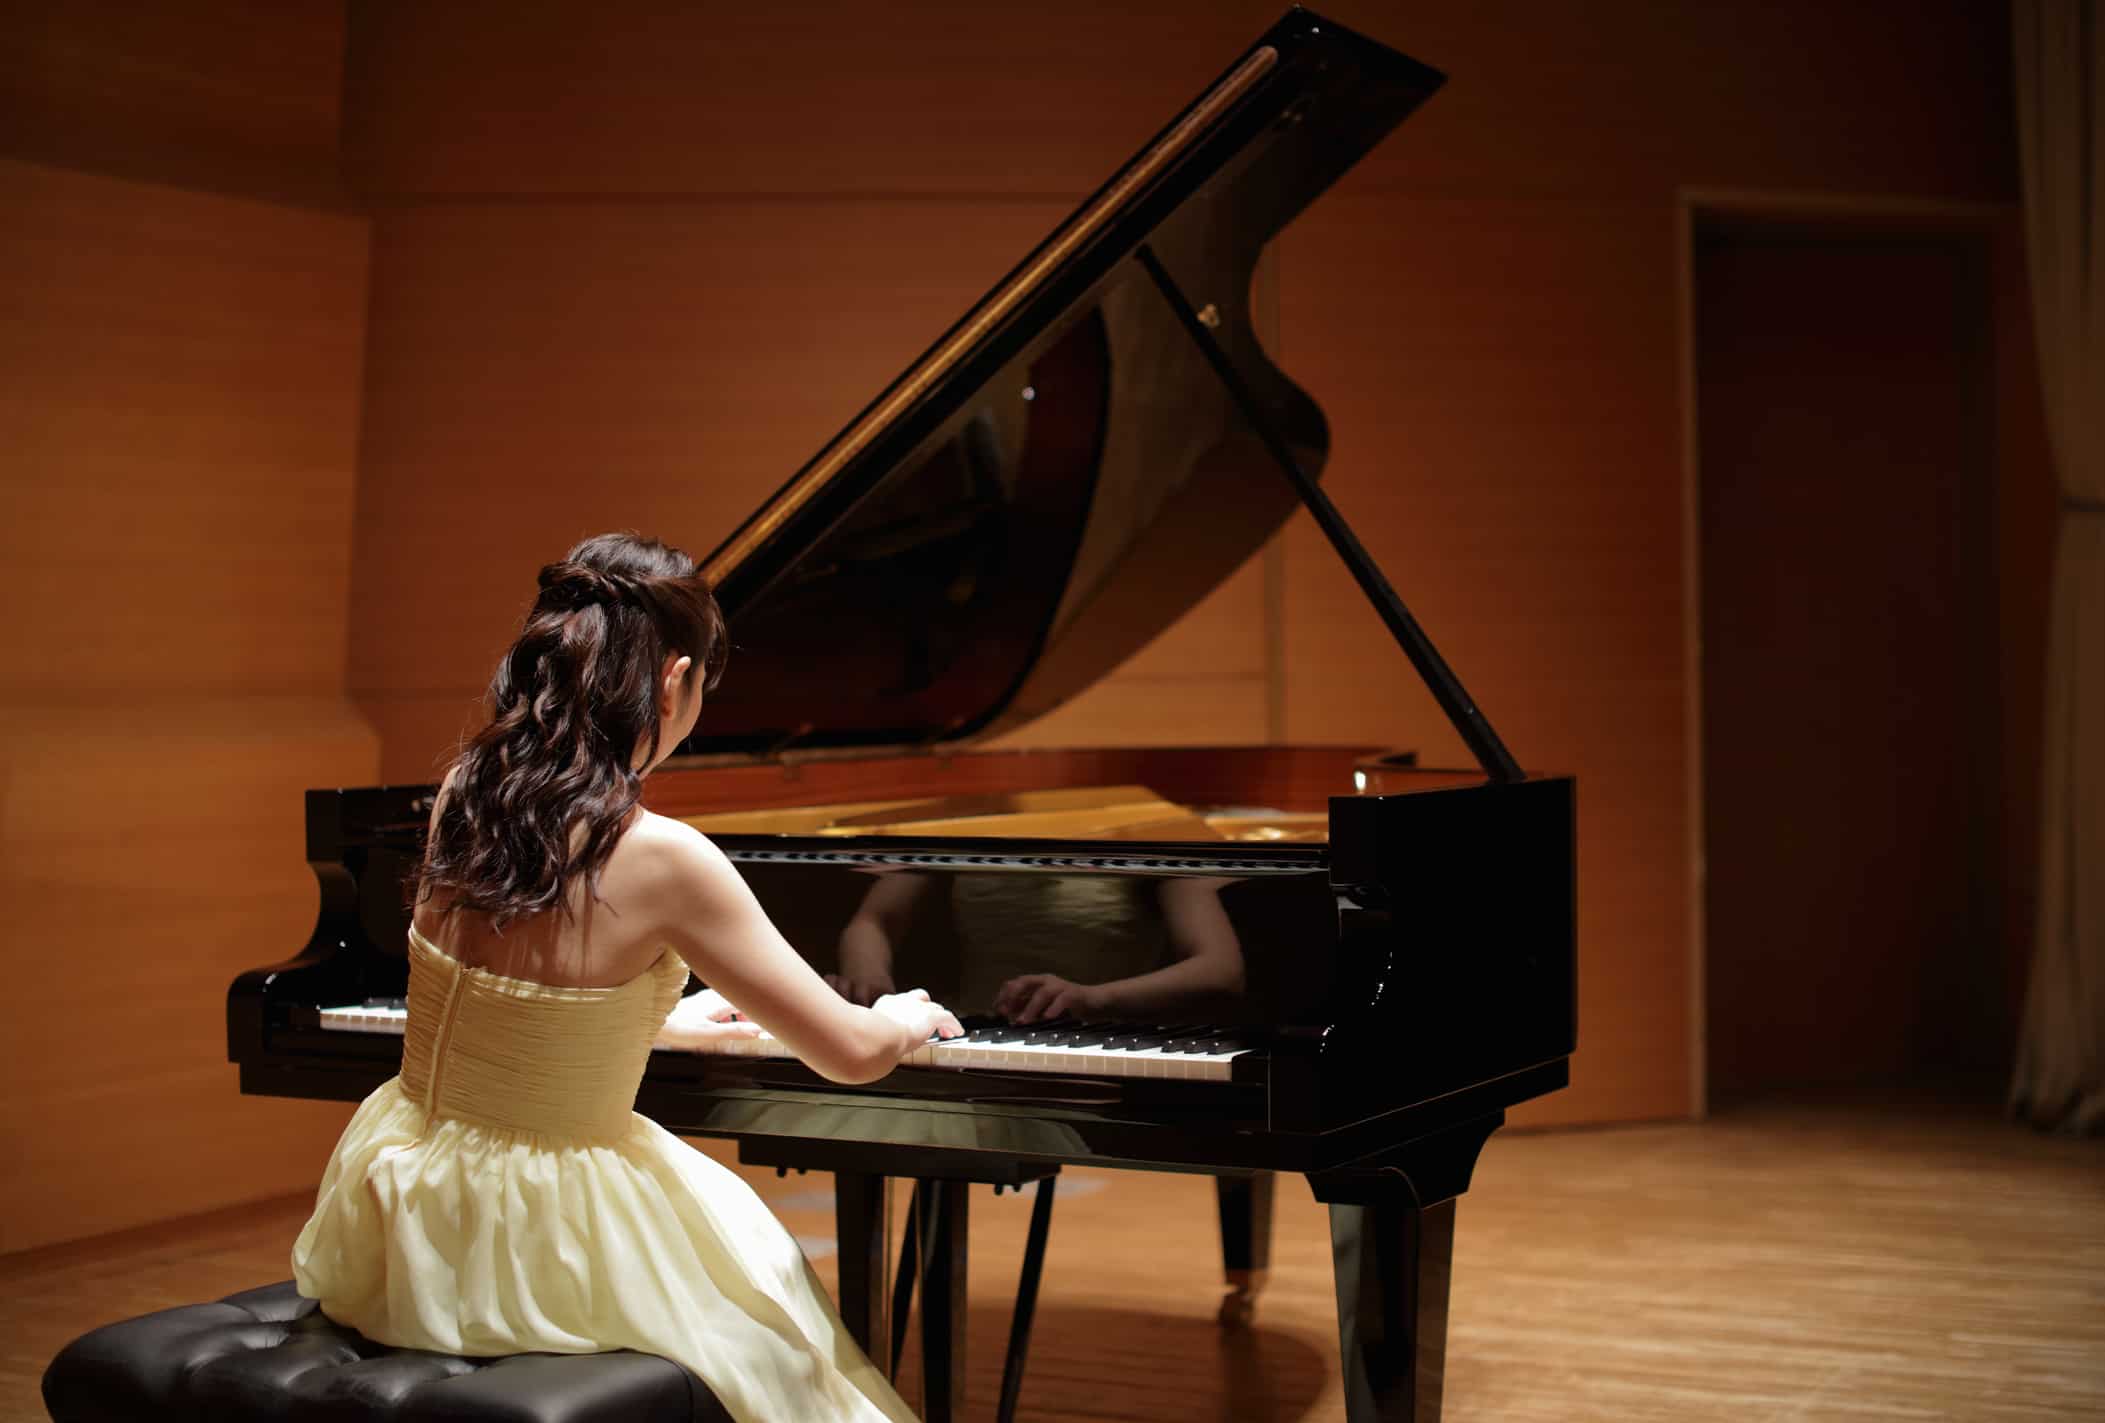 Female student playing piano during engaging piano recital